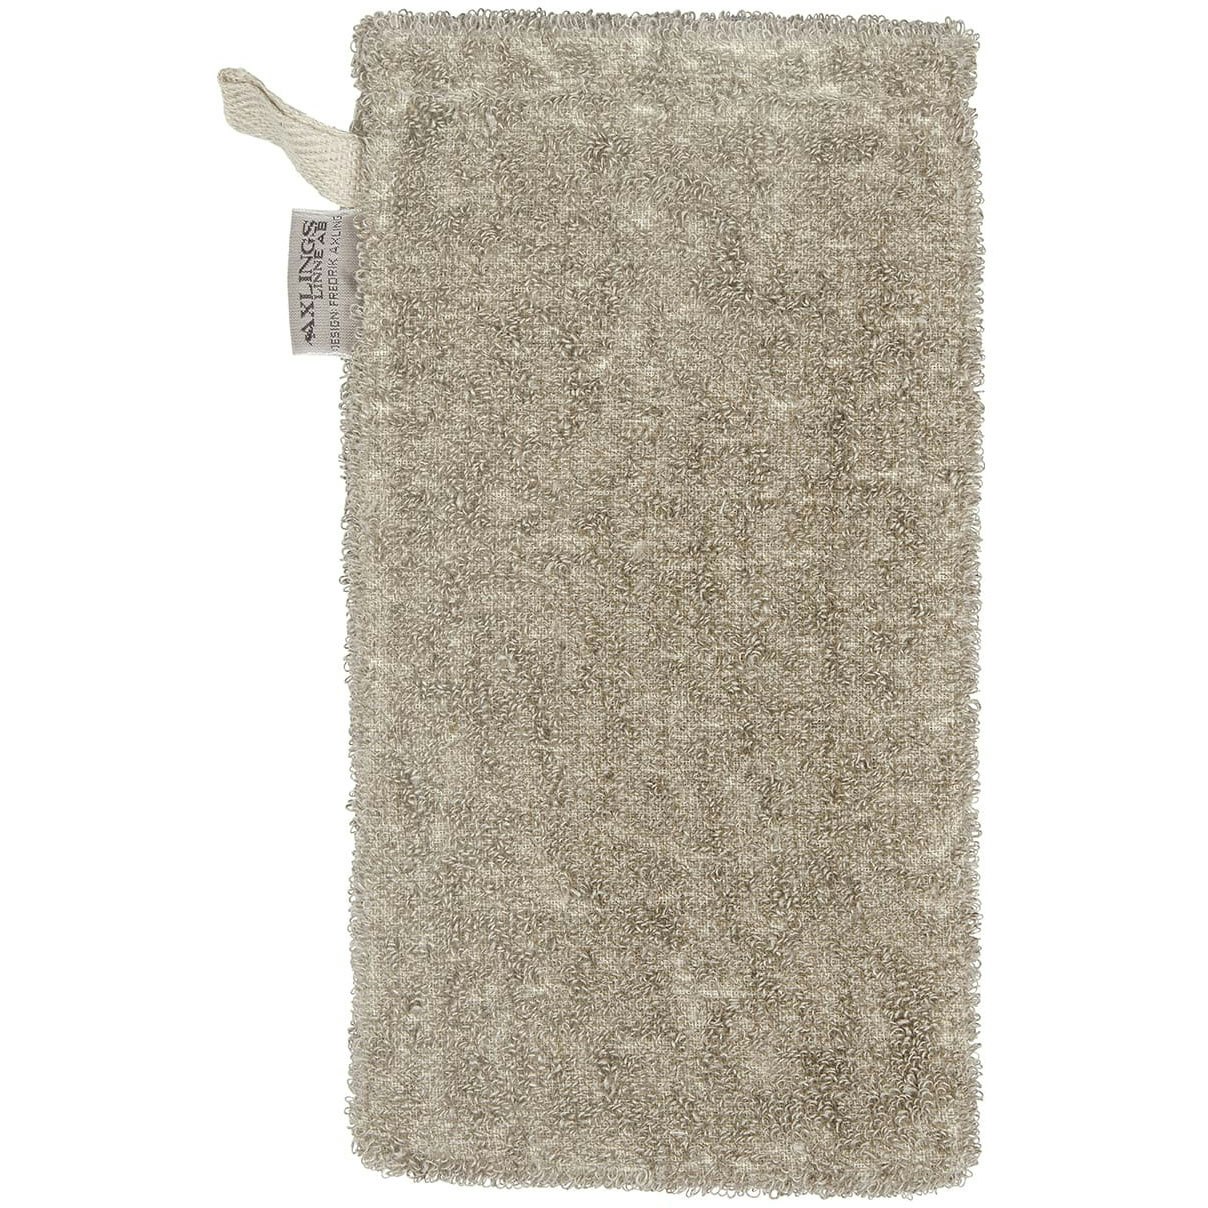 Wash Glove Linen Terry, Natural / Off-white